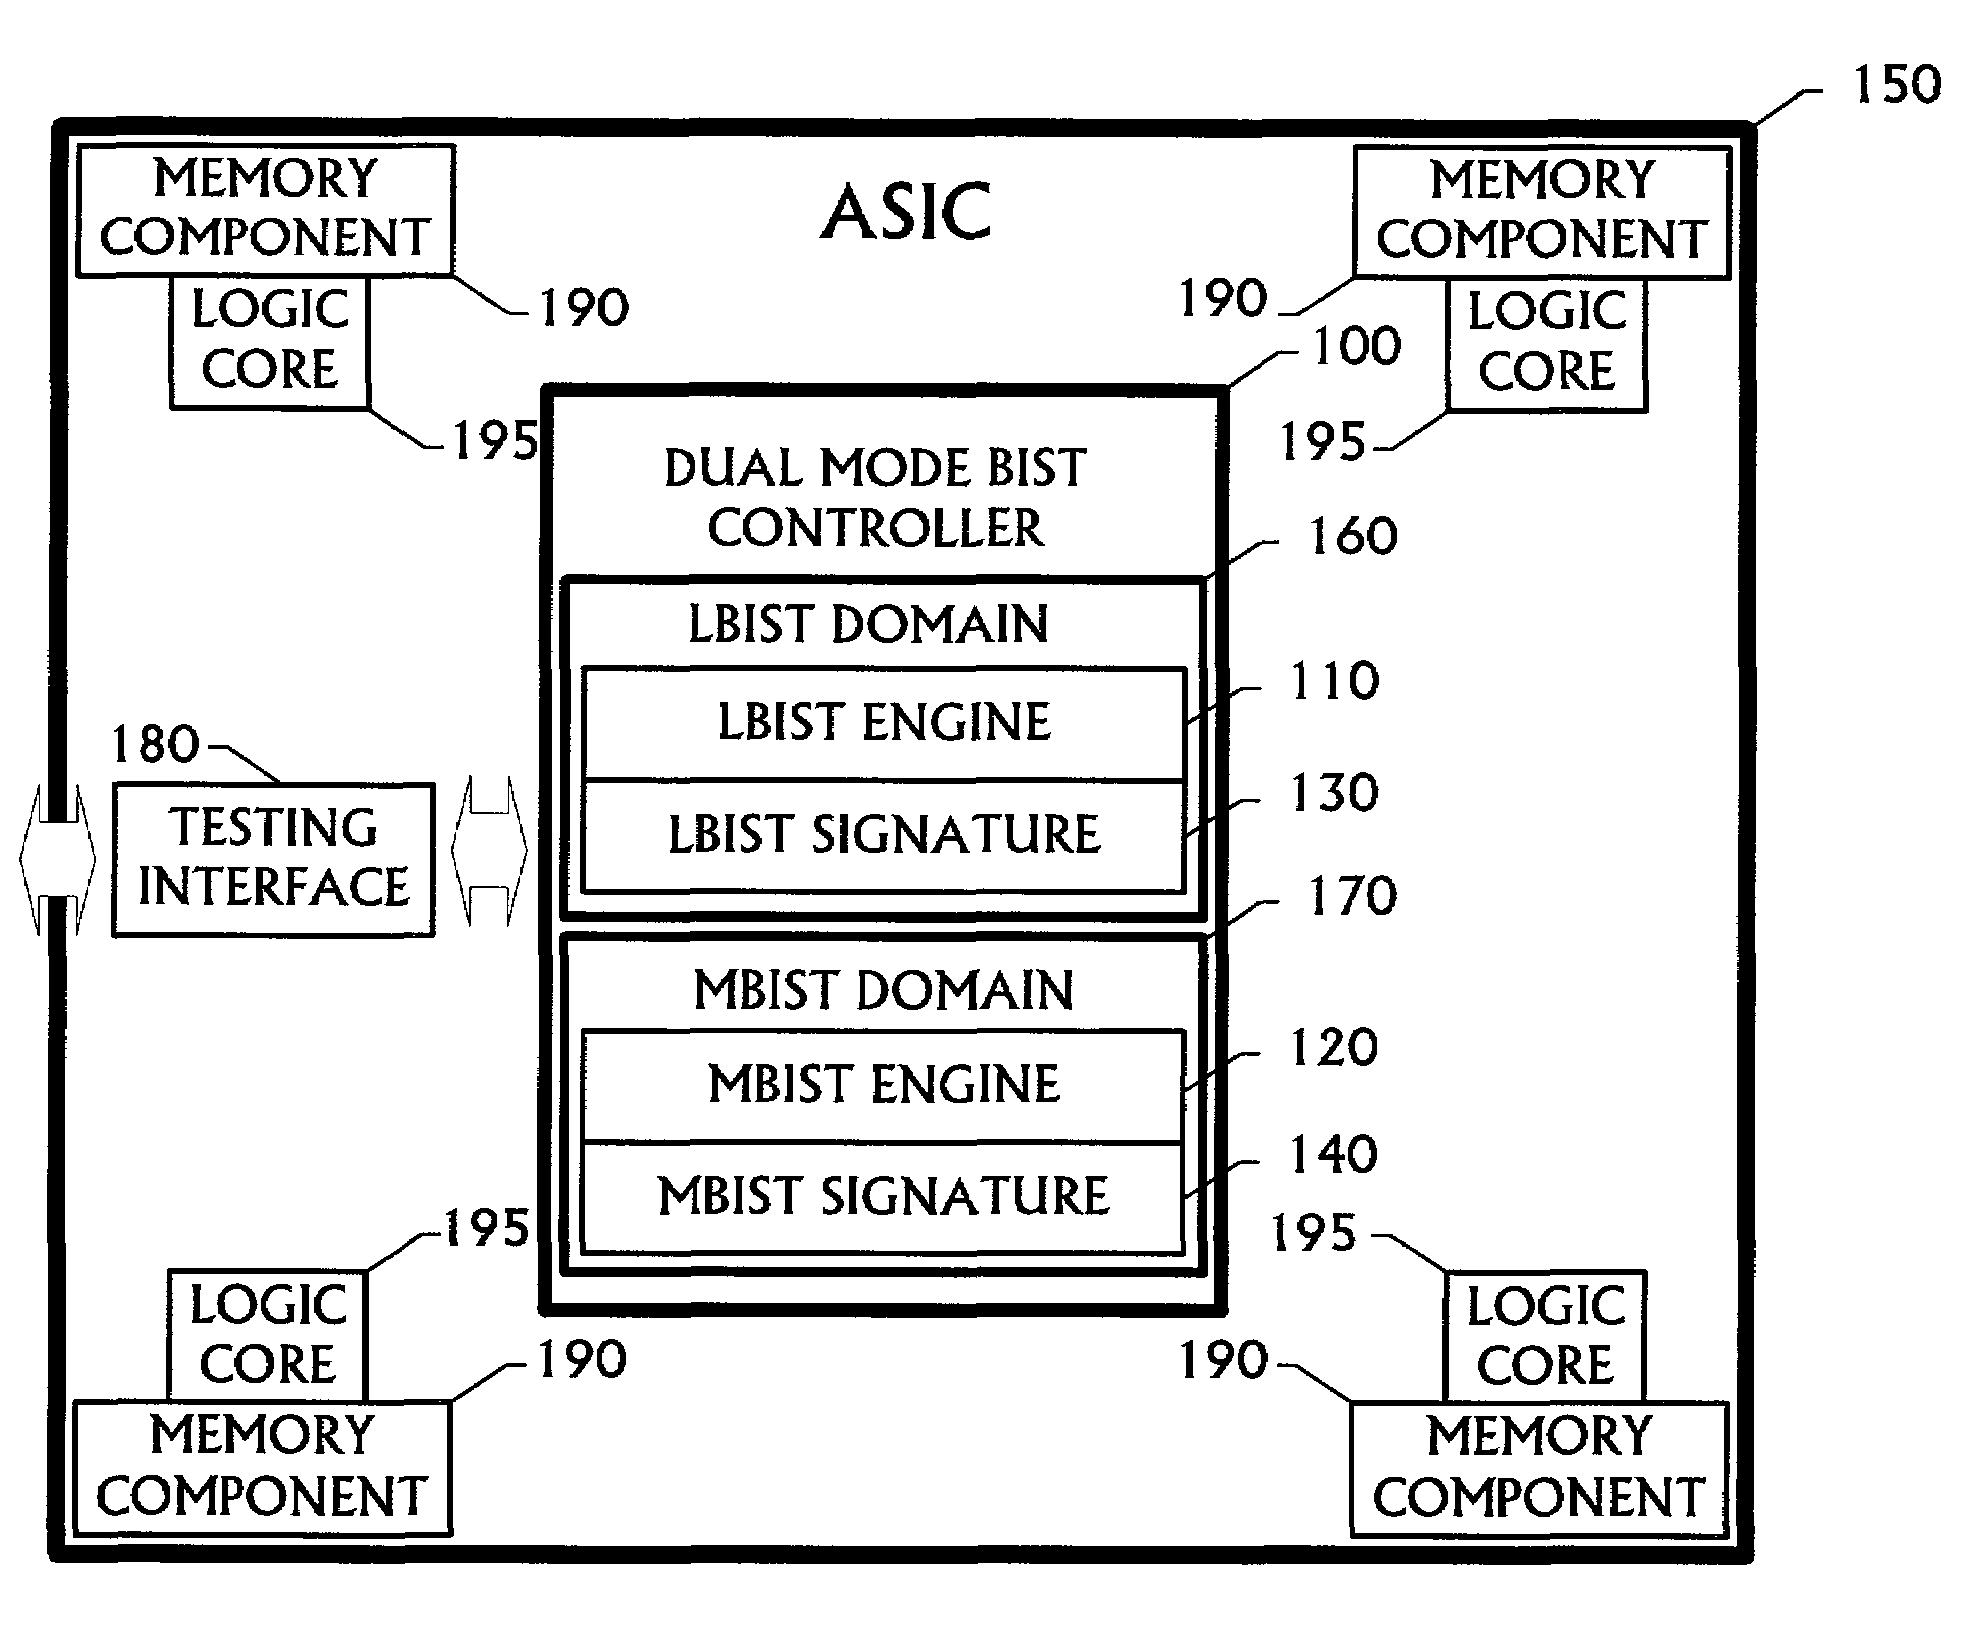 ASIC logic BIST employing registers seeded with differing primitive polynomials